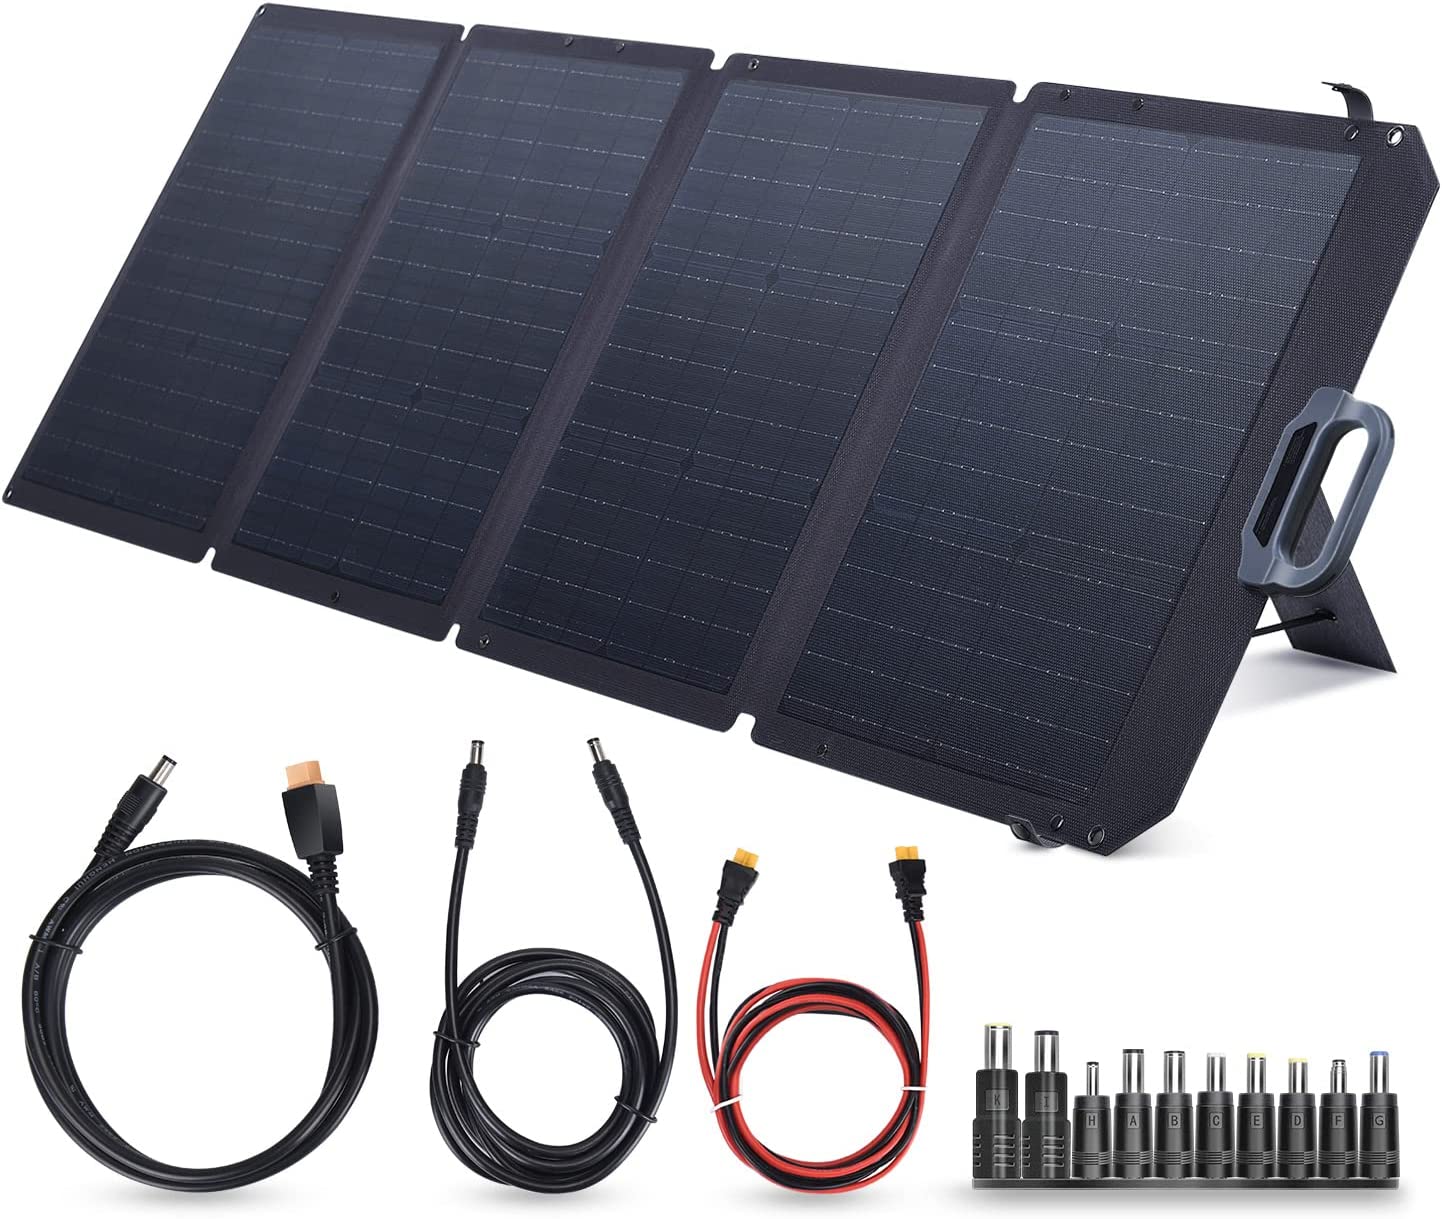 Solar Charger Power Bank 27000mAh with 4 Solar Panels